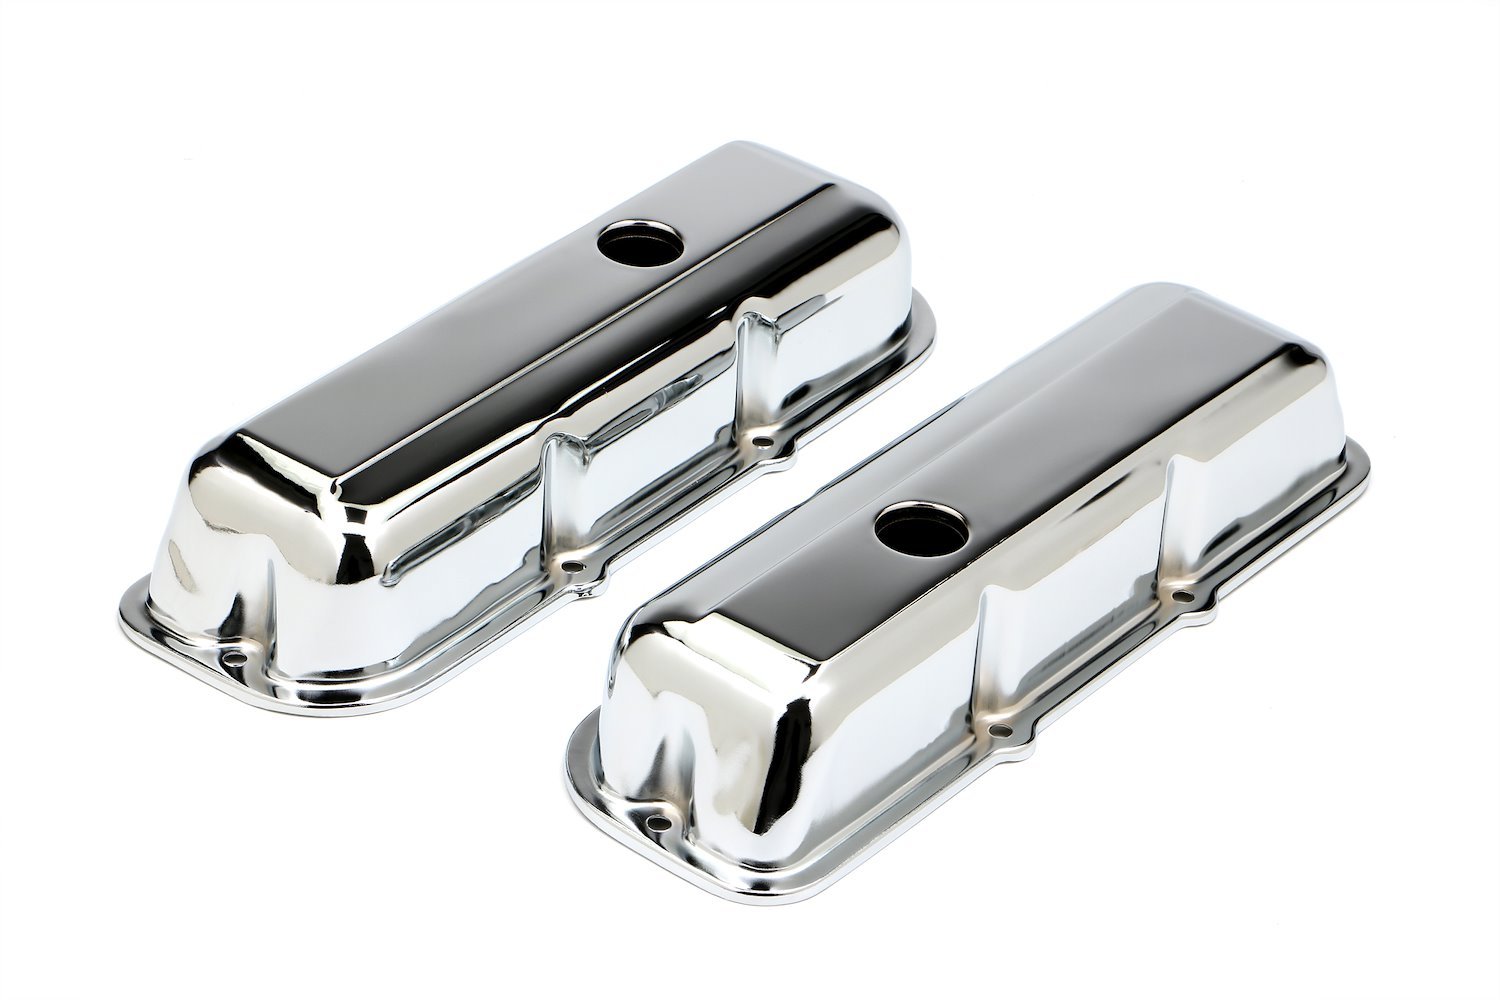 Chrome Plated Steel Valve Covers 1980-1989 Chevy 6-Cylinder Truck 2.8L V6